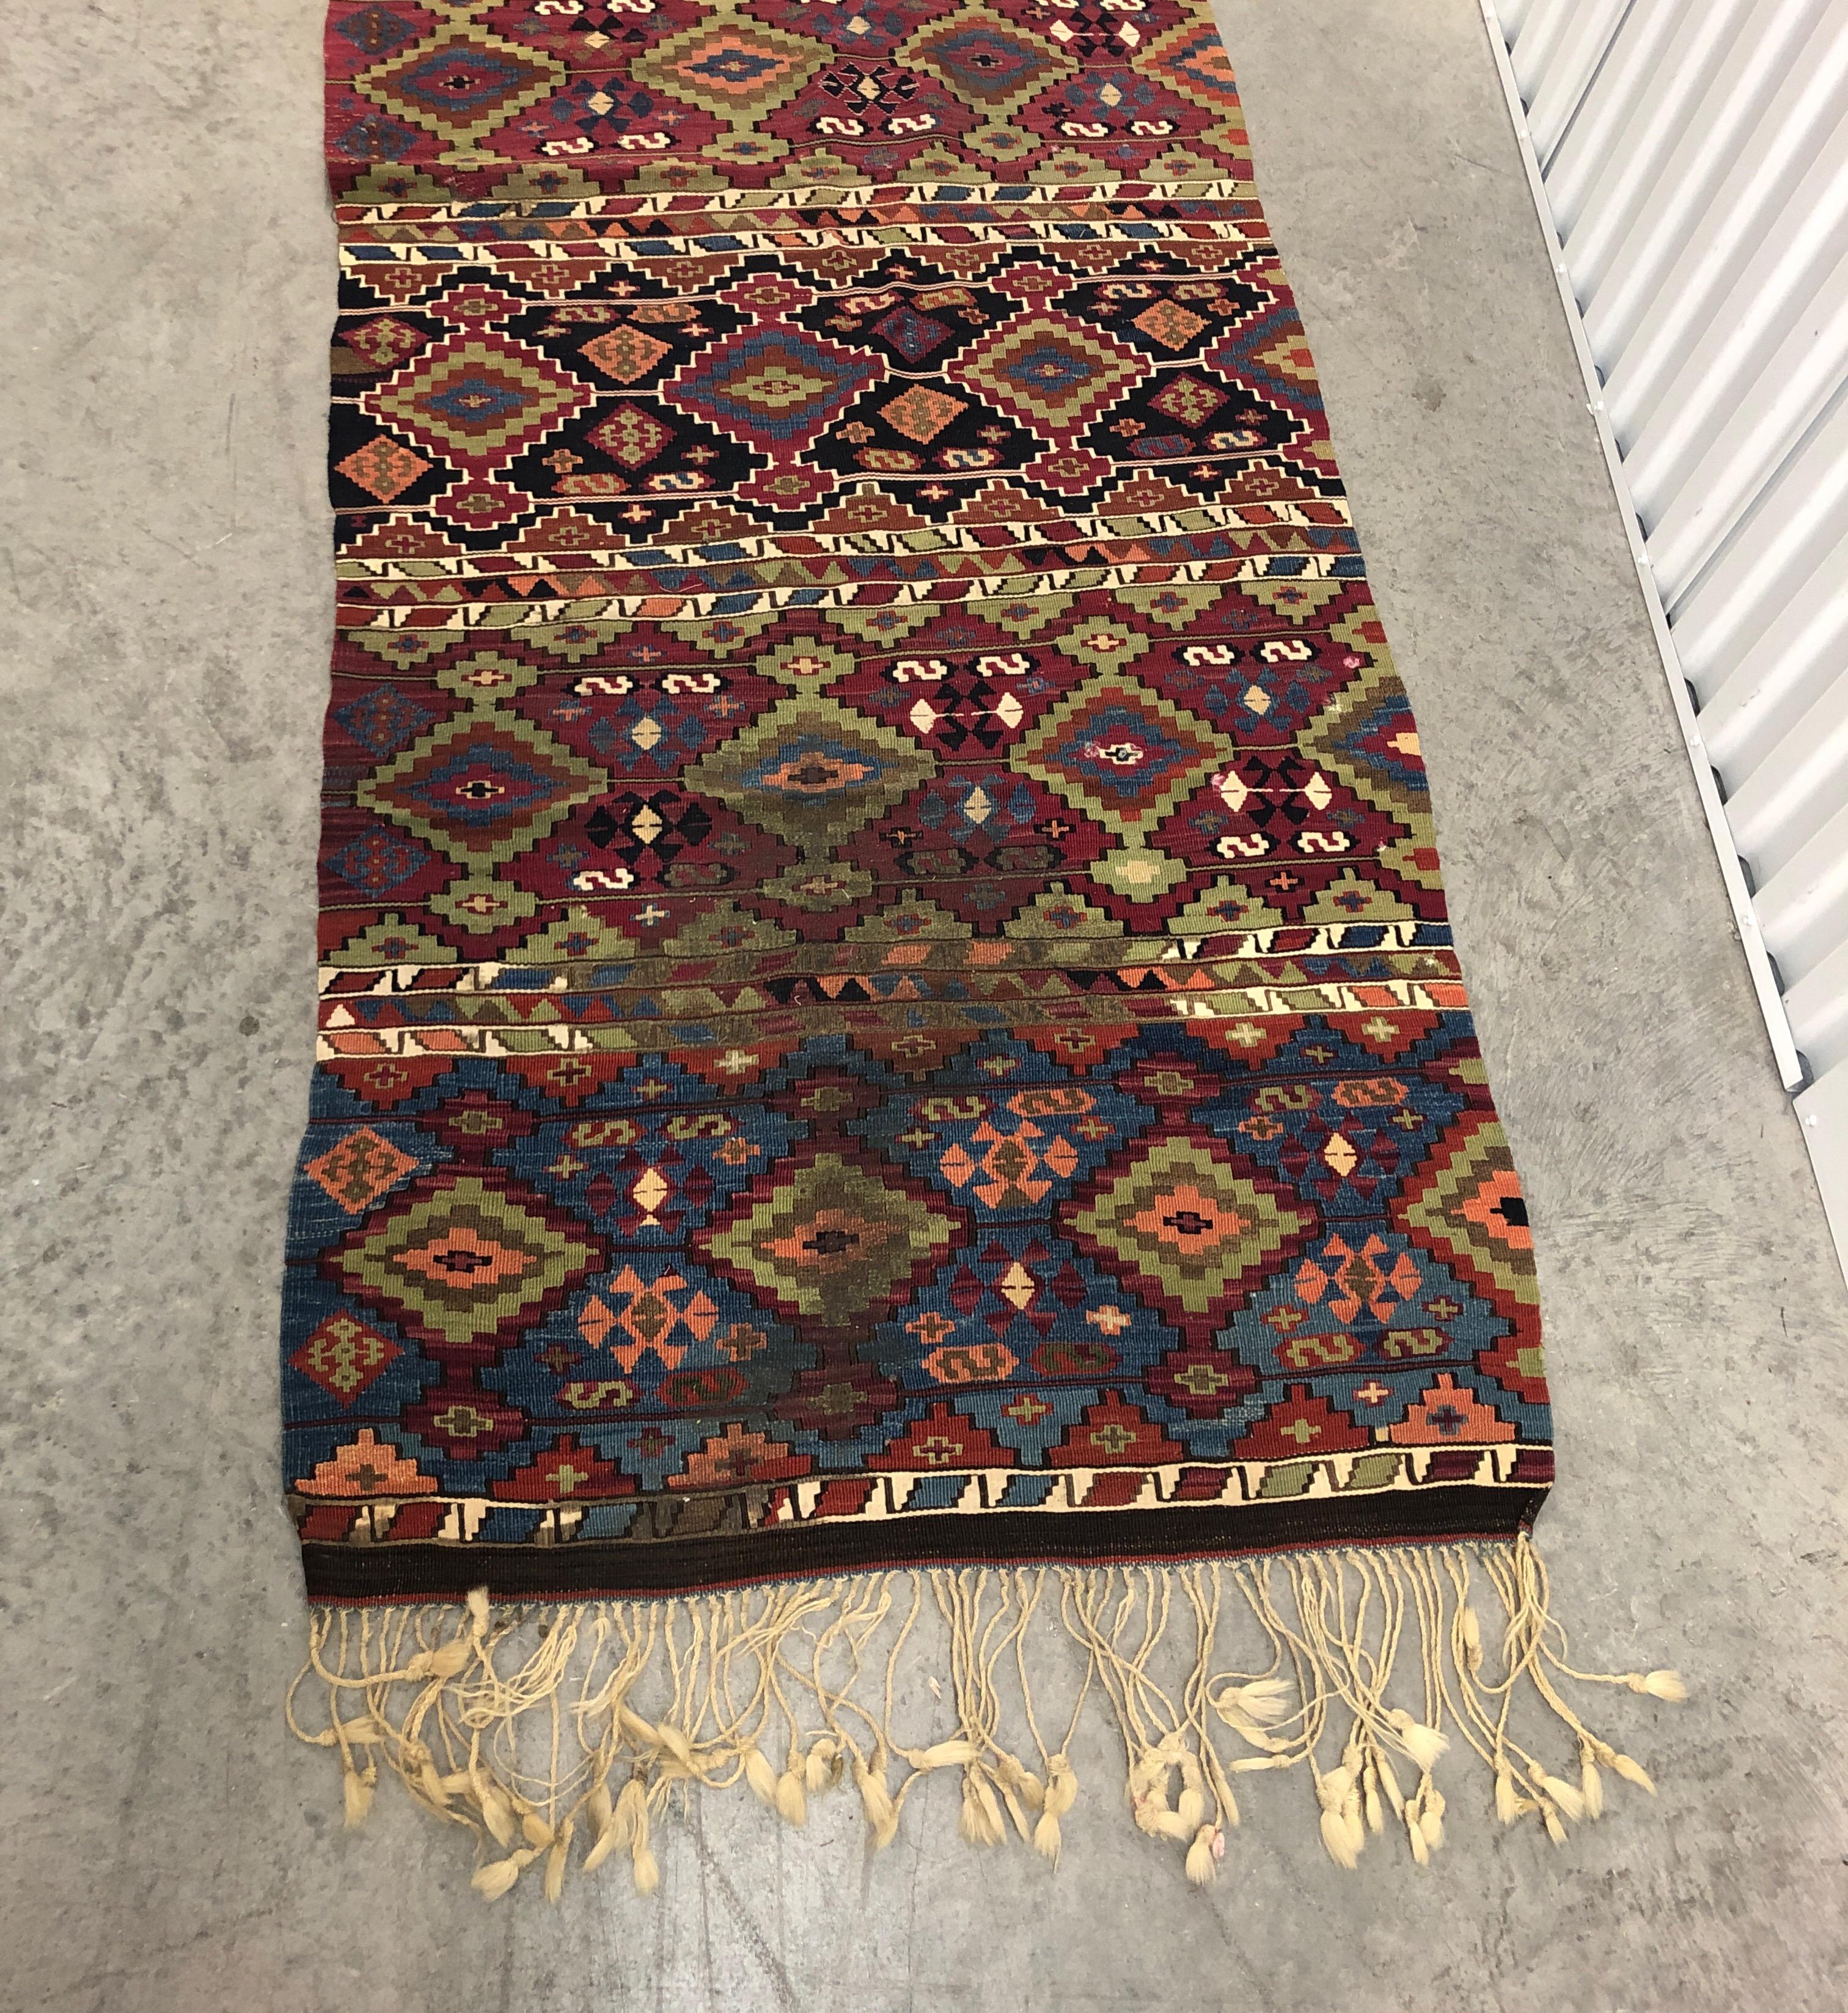 Vintage green and orange long Kilim runner with hand knotted fringes.
Long rug with multi color field.
Size: 143”L x 33” W 
(including fringes that are 6” long).